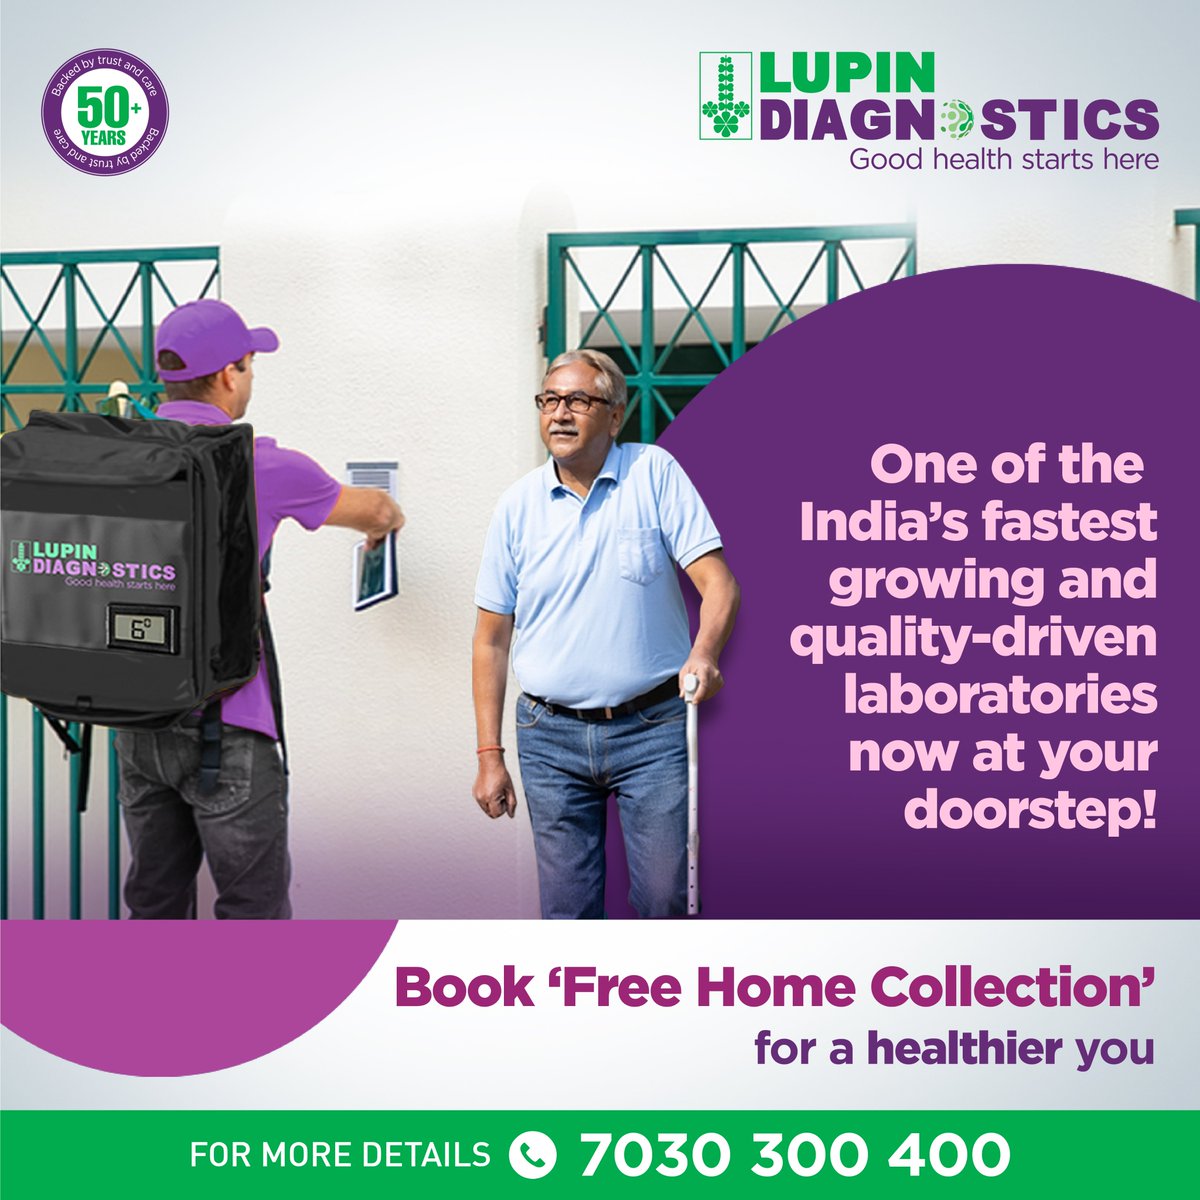 FREE HOME COLLECTION at your convenience from Lupin Diagnostics.

Book health check-up packages.

Visit  - bit.ly/3YULD1V
or 📞 Dial 7030300400 for any queries.

.
.
.
.
#lupindiagnostics #goodhealthstartshere #diagnostics #pathology #healthpackages #kidney #KFT